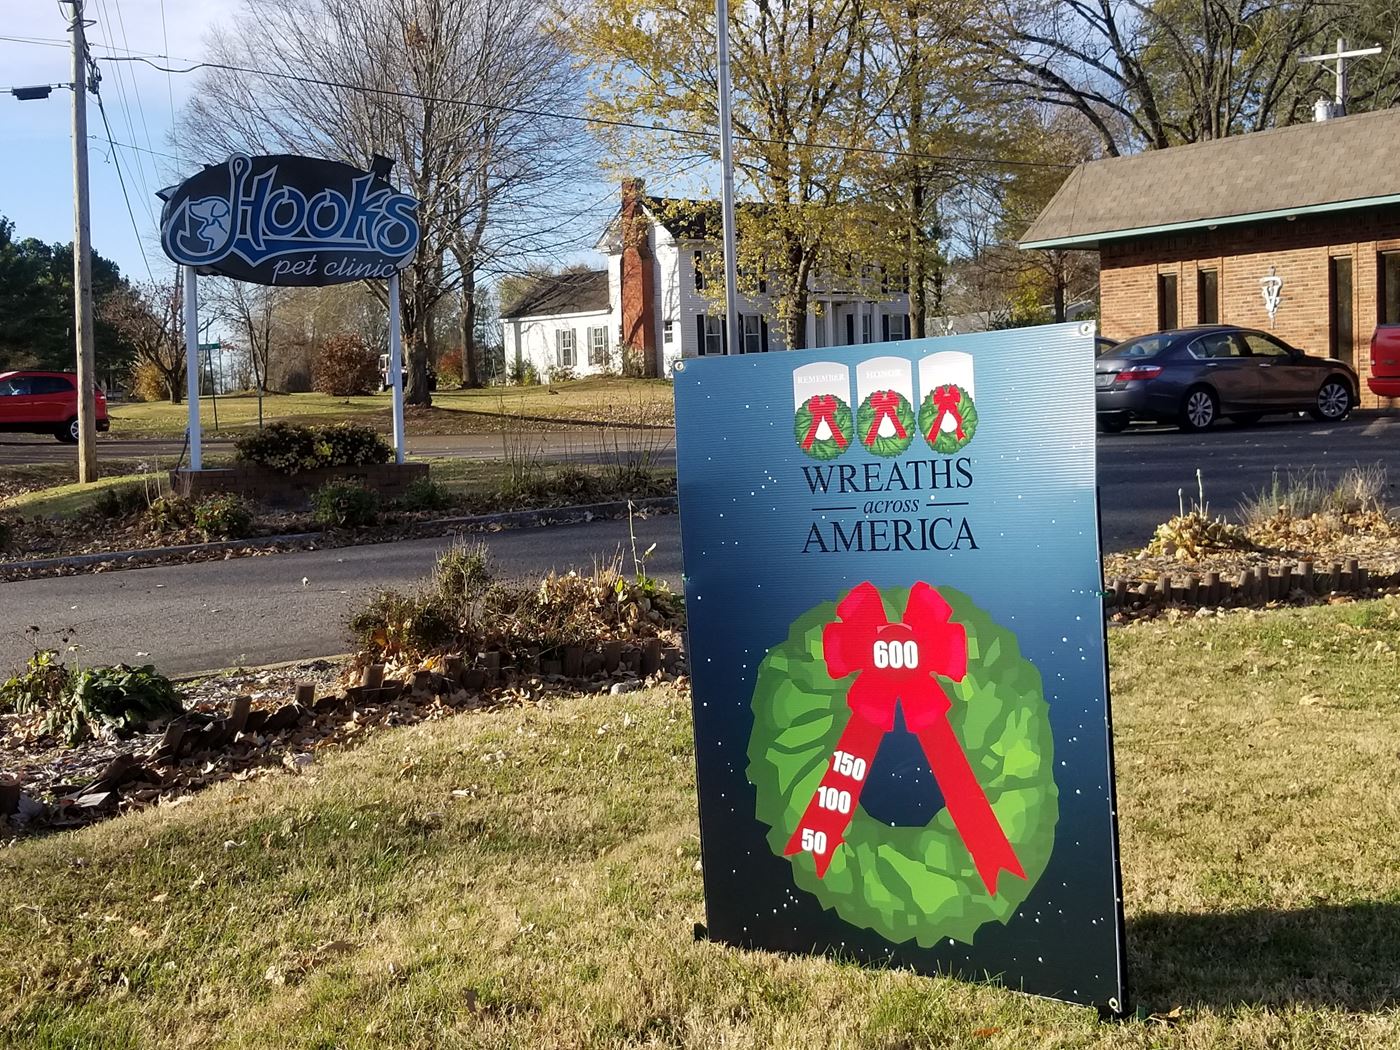 This year Hook's Pet Clinic not only sponsored wreaths; but, a prime spot on their property supported one of the goal achievement boards.